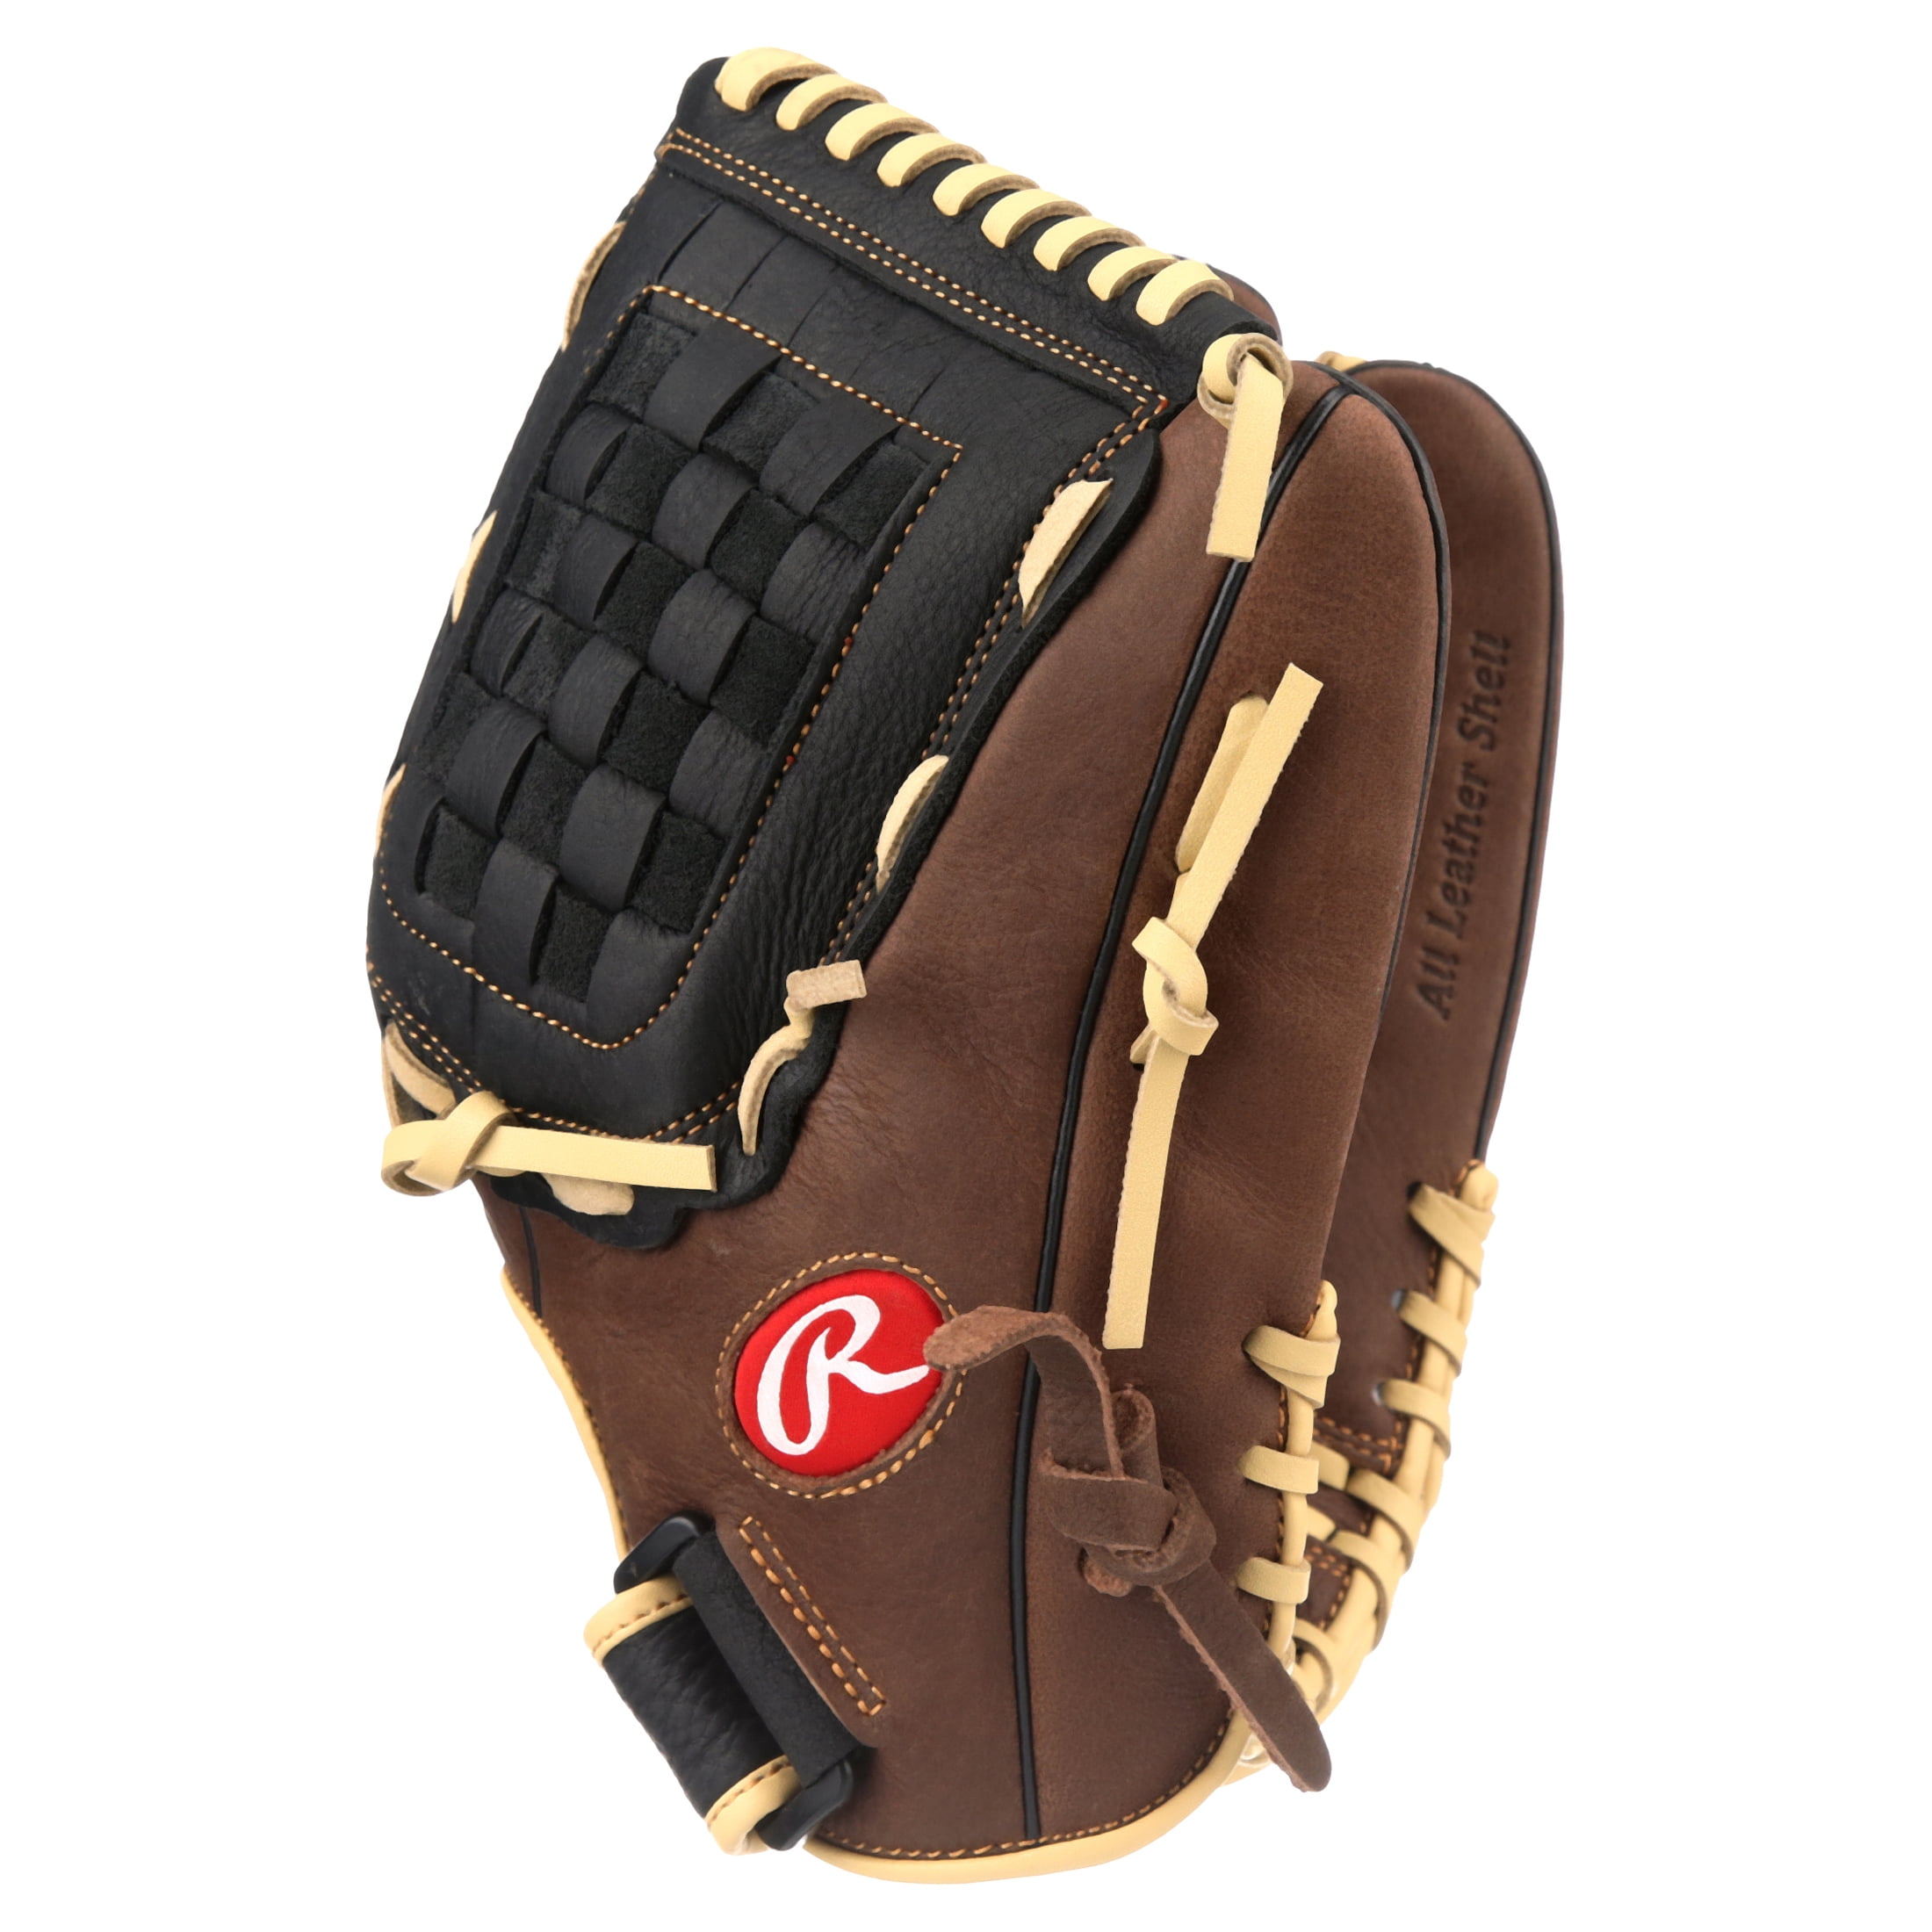 Rawlings Leather Baseball Glove Rbg36tbr Adult Right Hand Throw for sale online 